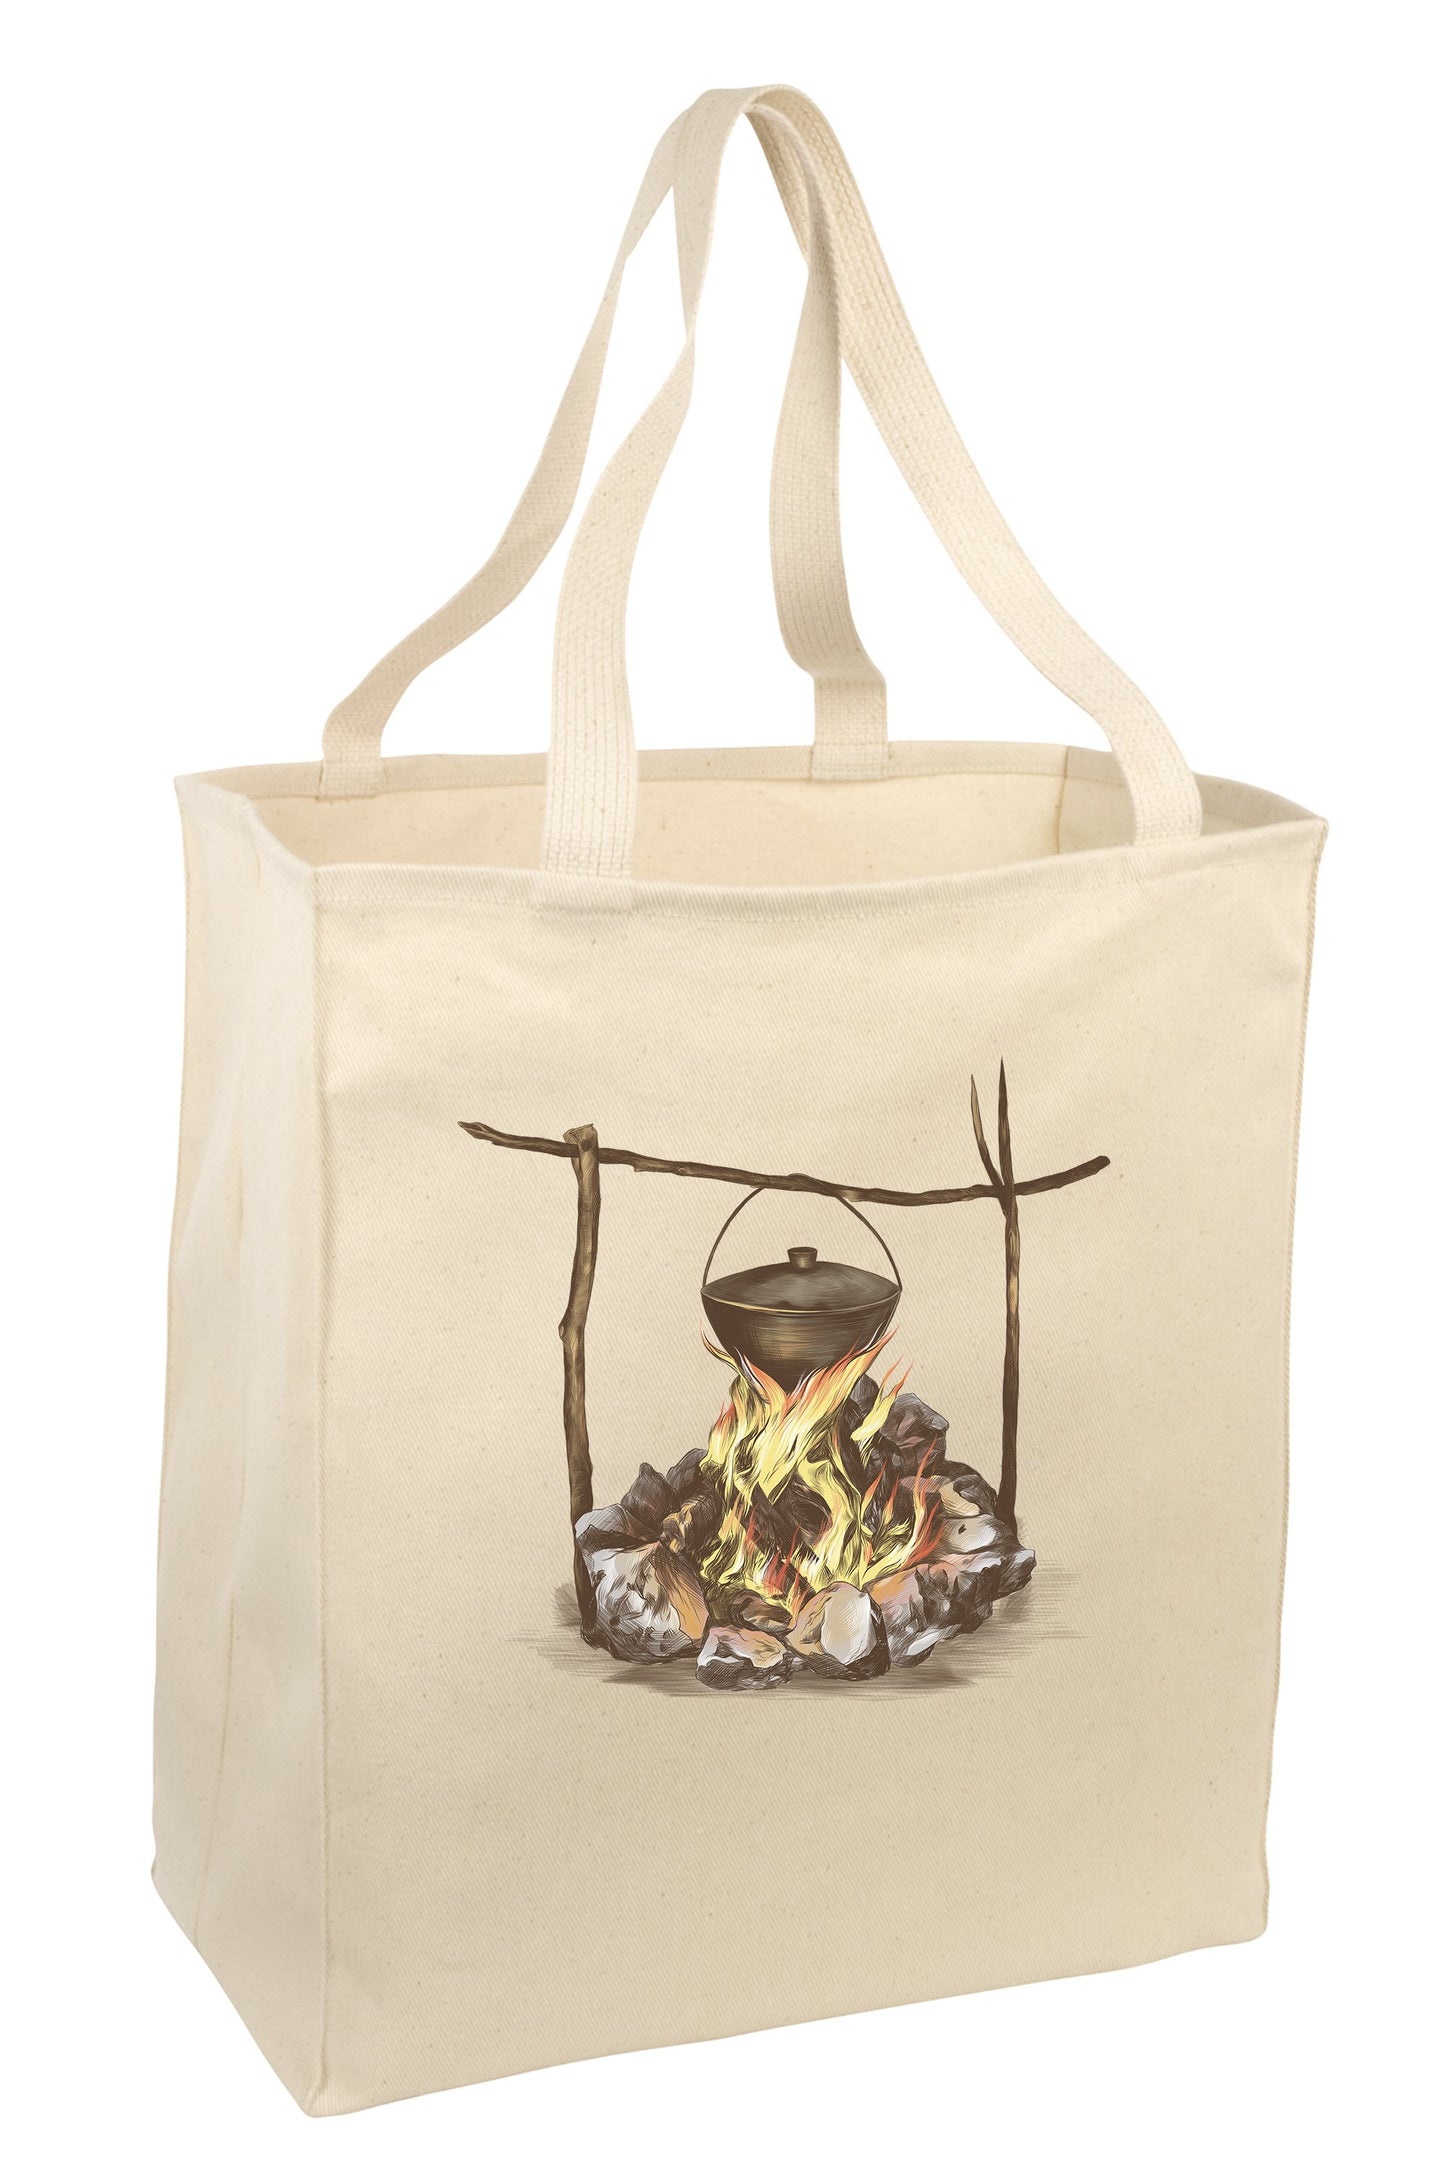 Over the Shoulder Beach Summer Tote Bag. Durable 100% Cotton and 22" Long Handle Shopping Bag. (Firepit)